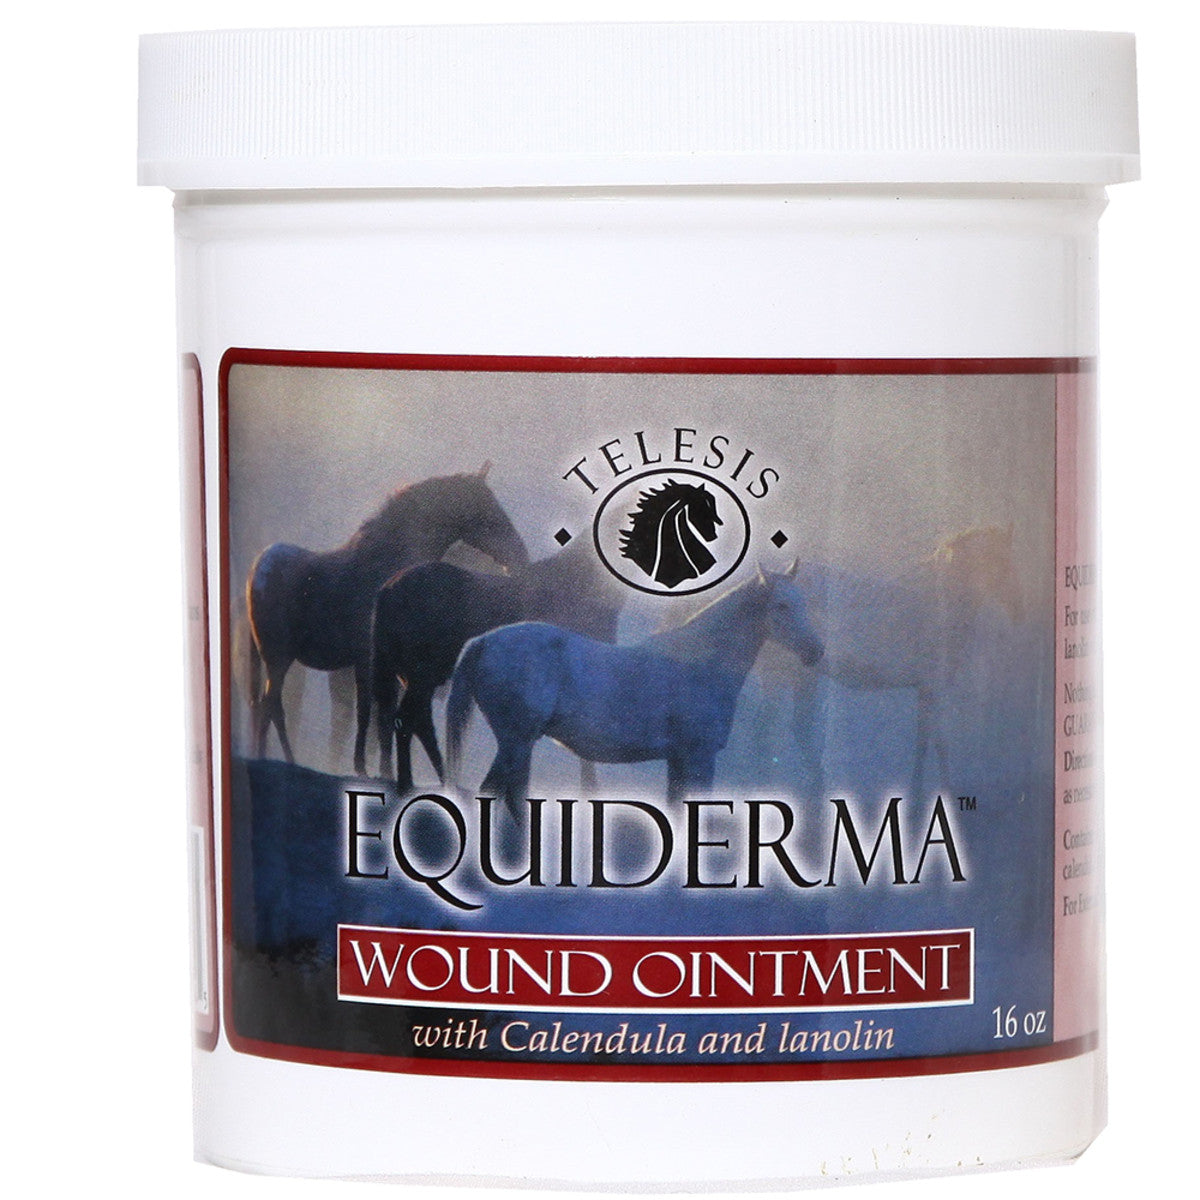 EQUIDERMA WOUND OINTMENT 16 OZ